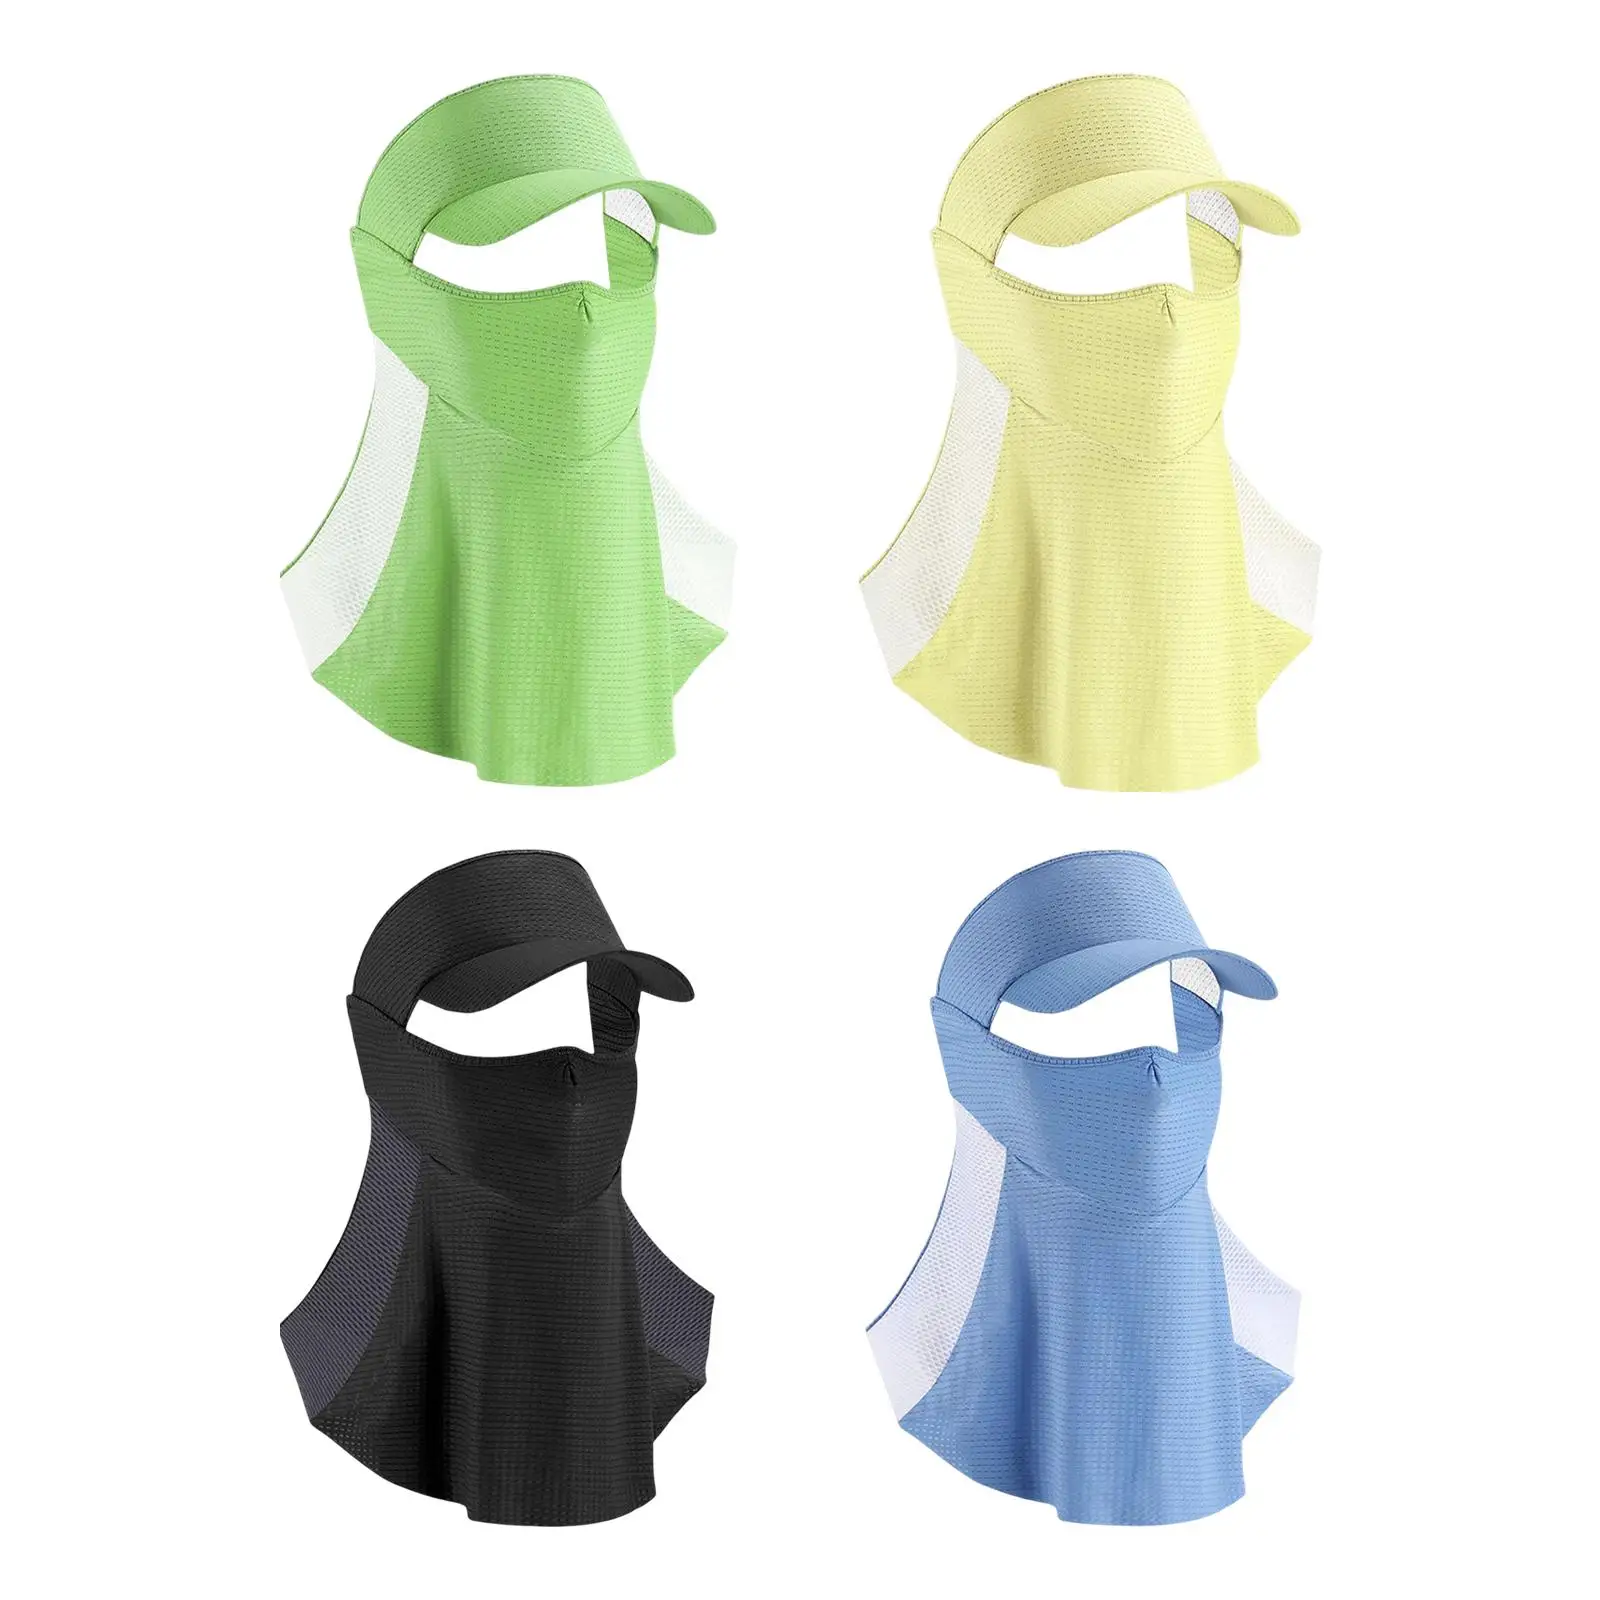 Neck Gaiter Face Cover Durable Sun Cap Sun Protection Face Mask Breathable Neck Cover for Outdoor Fishing Hiking Camping Driving